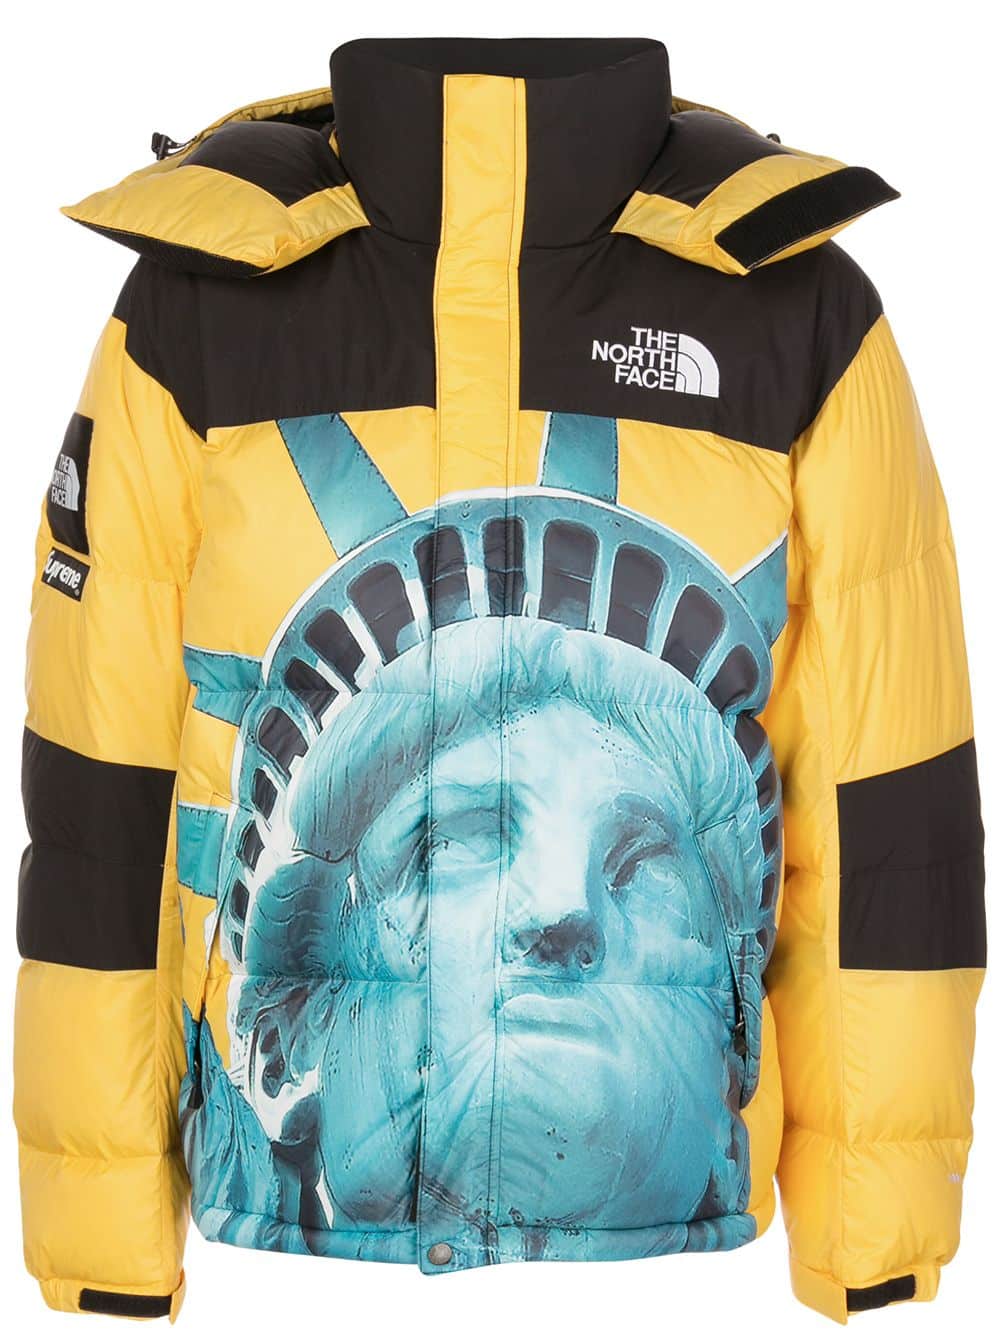 Supreme x The North Face jas - Geel